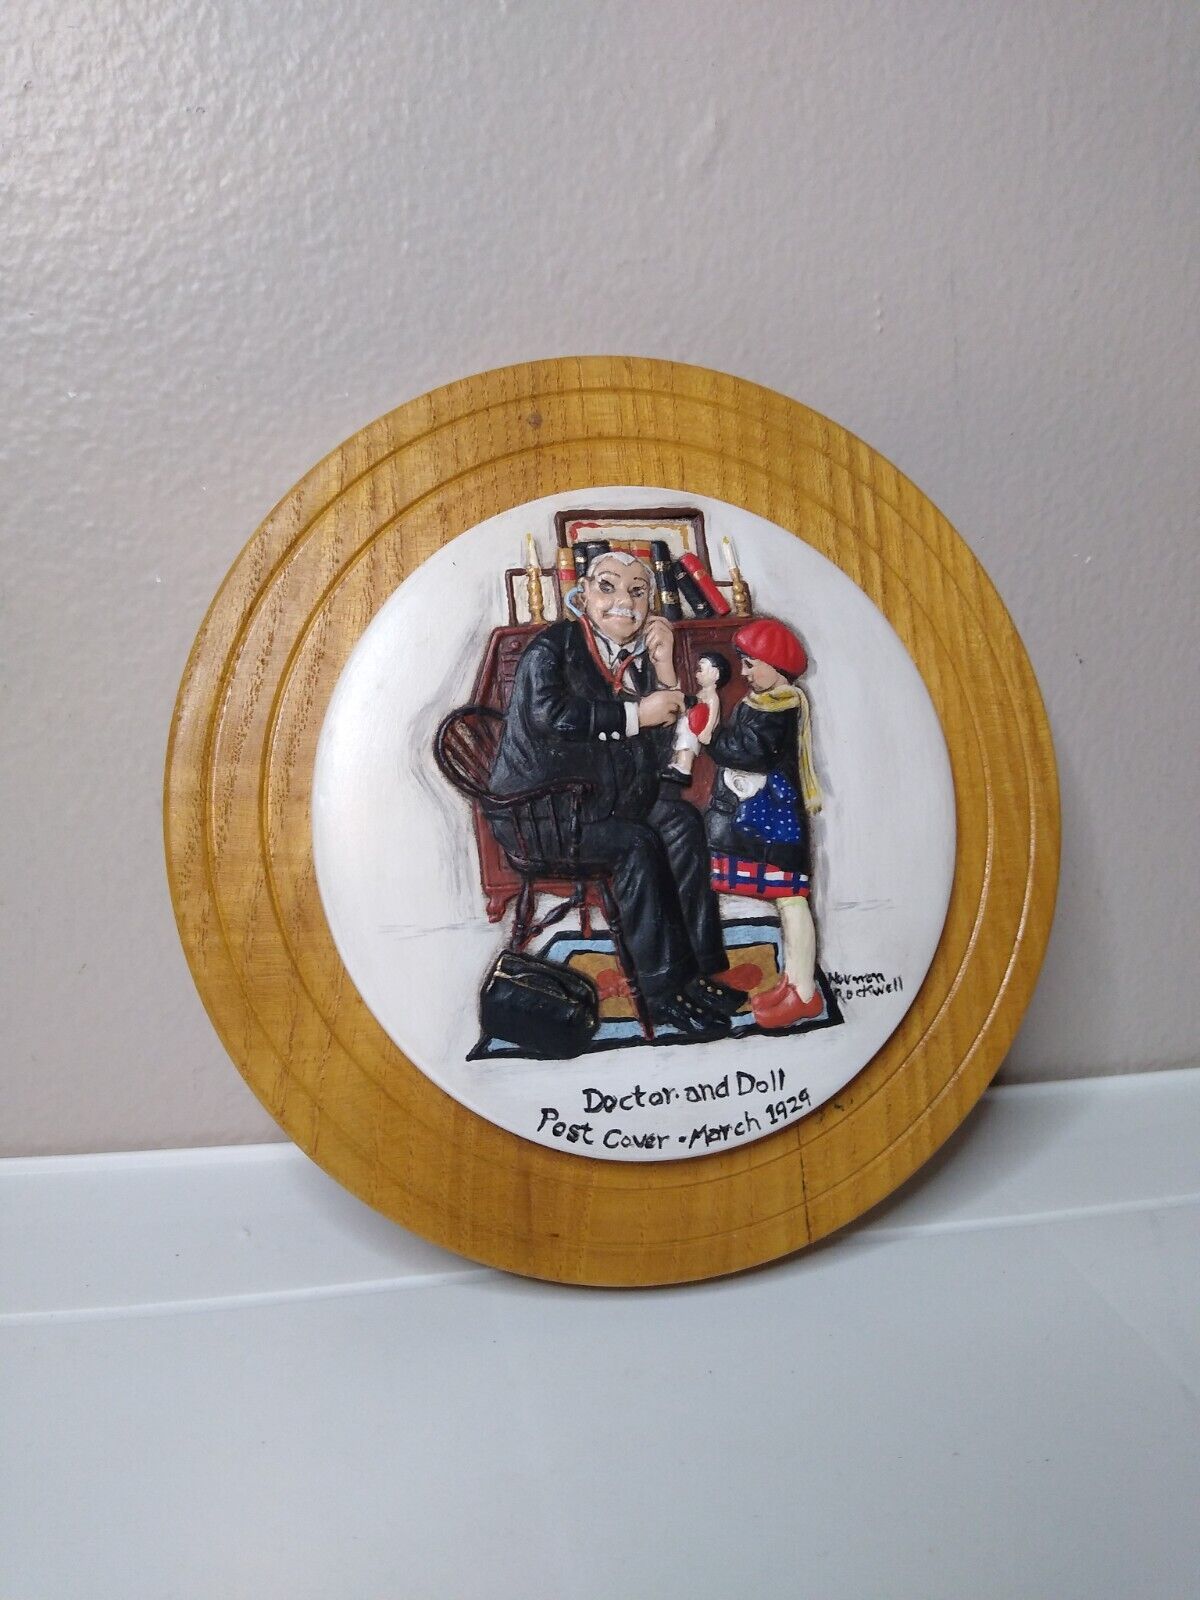 Vintage Doctor And Doll Norman Rockwell Ceramic And Wood Round Wall Decor - $39.99